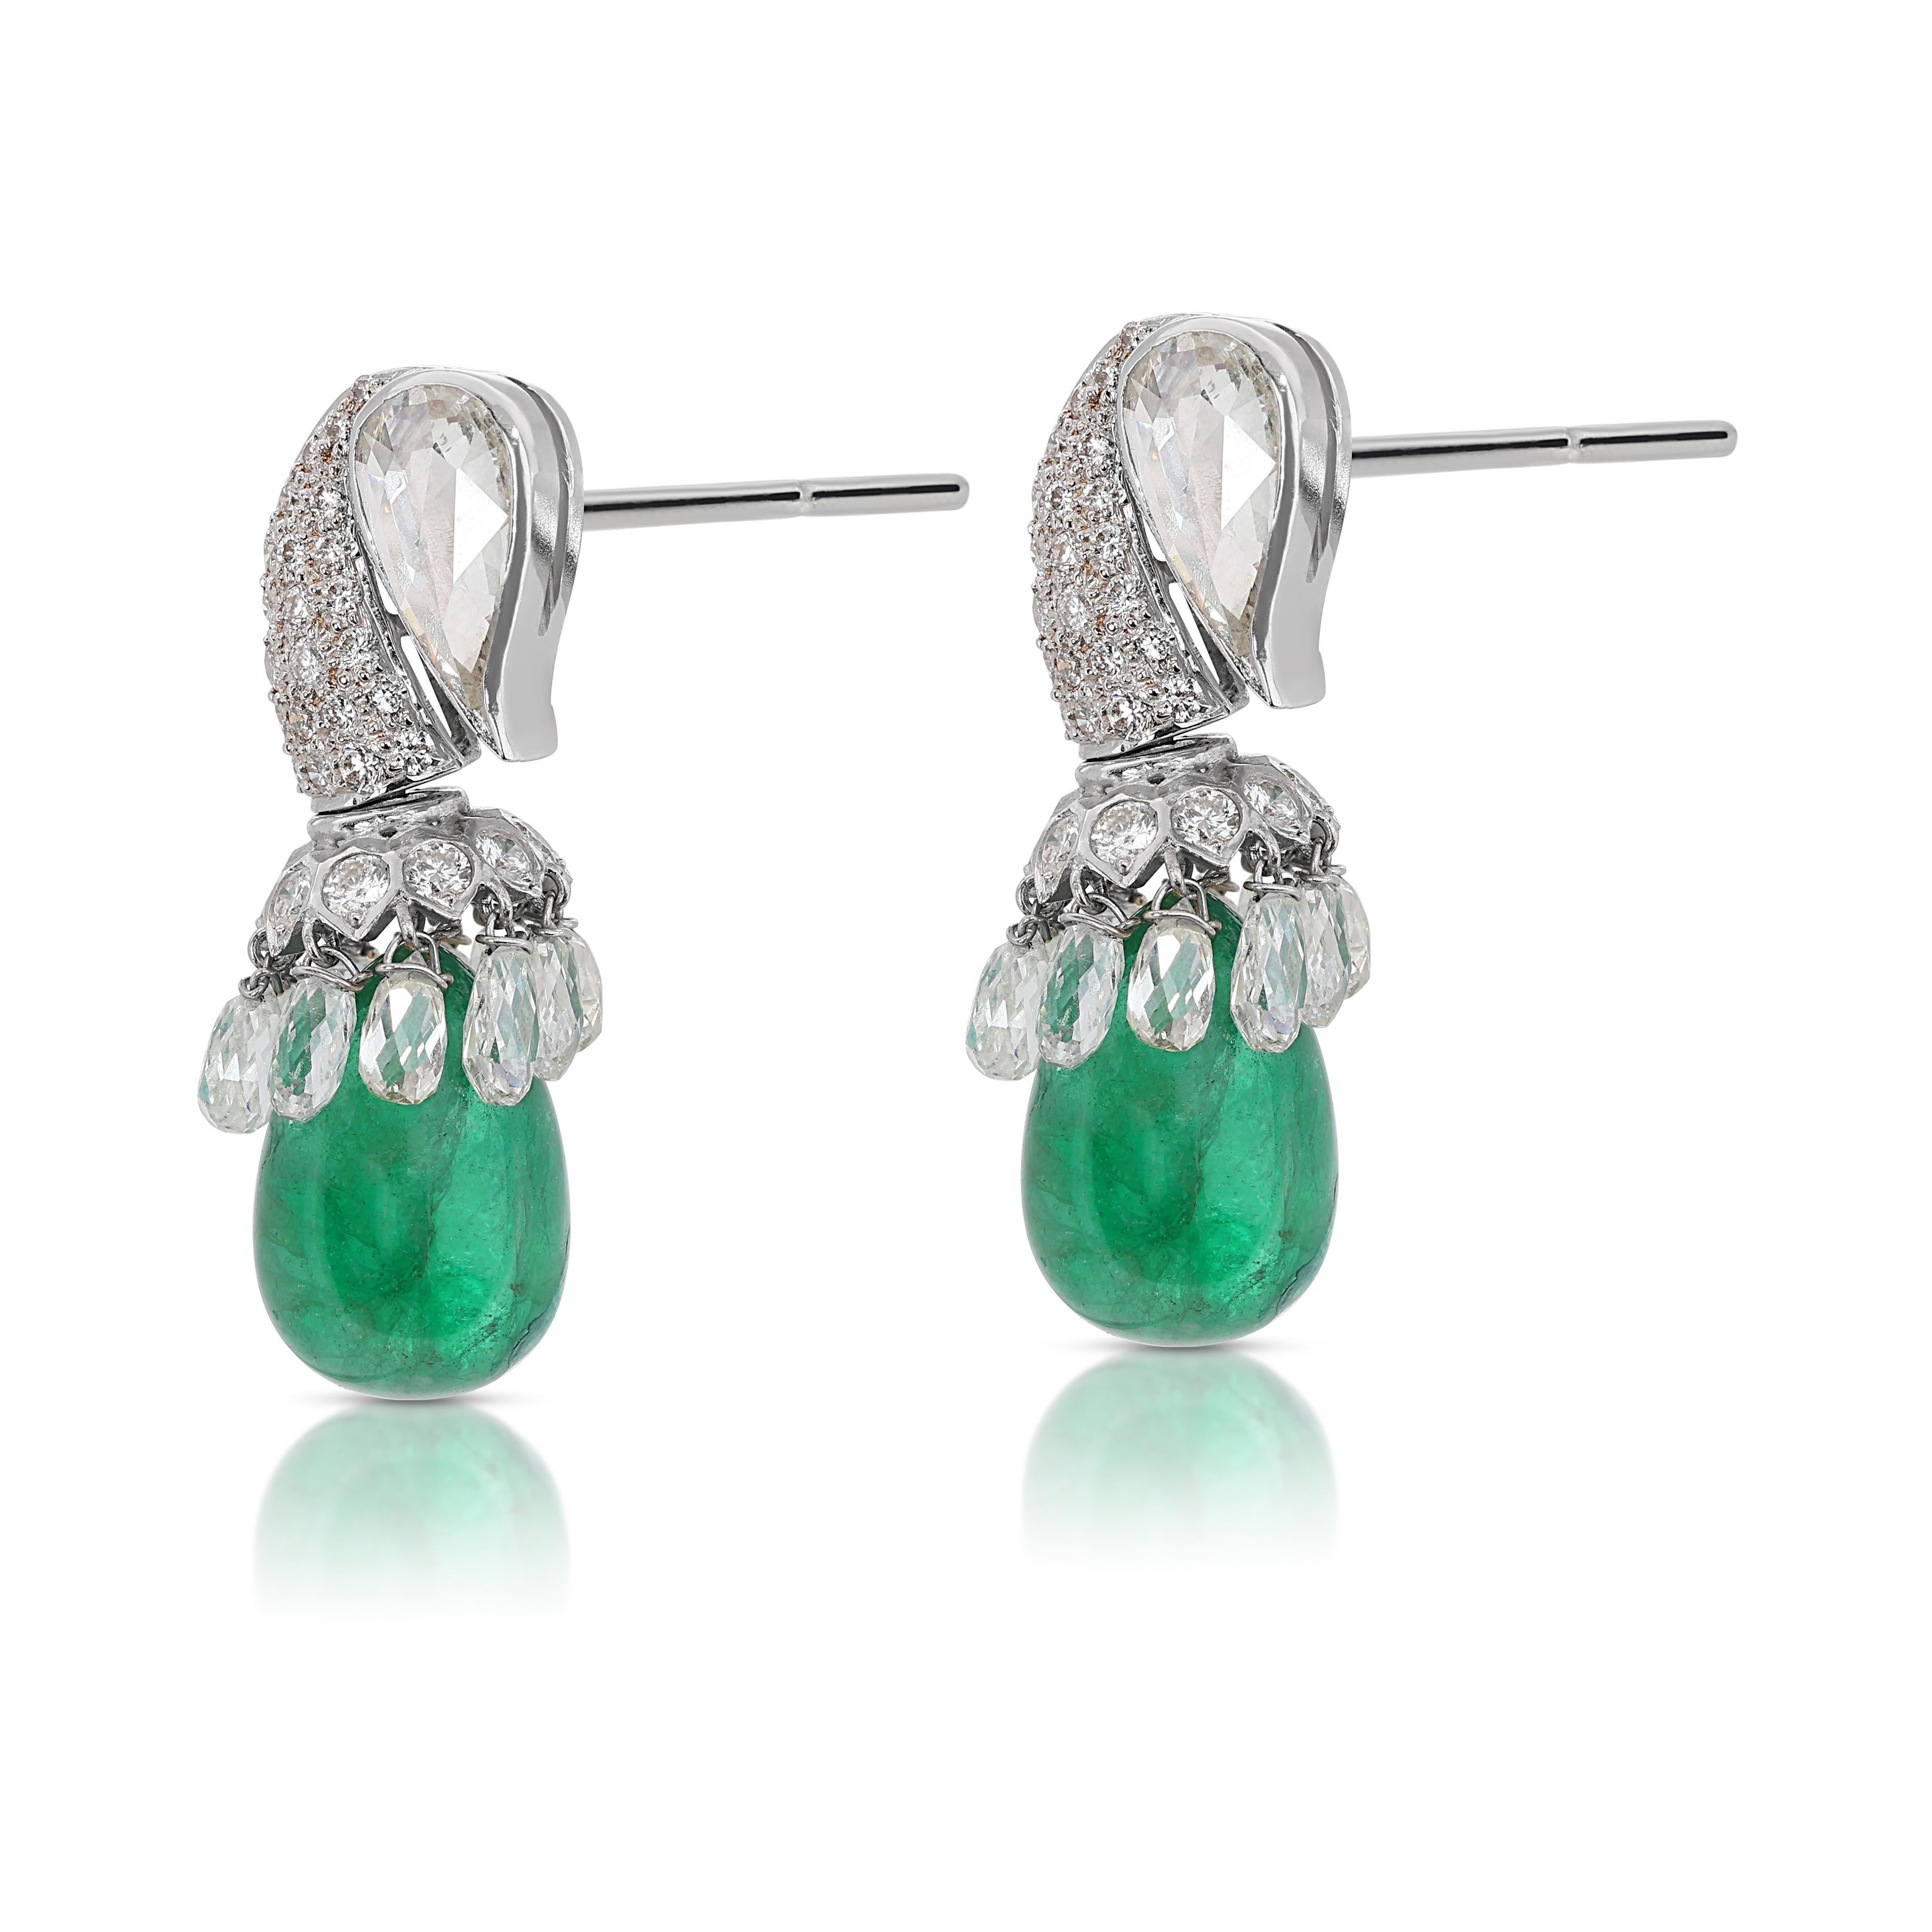 Gorgeous 24.31ct Green Emerald Teardrop Earrings with Diamonds in 18K White Gold In Excellent Condition For Sale In רמת גן, IL